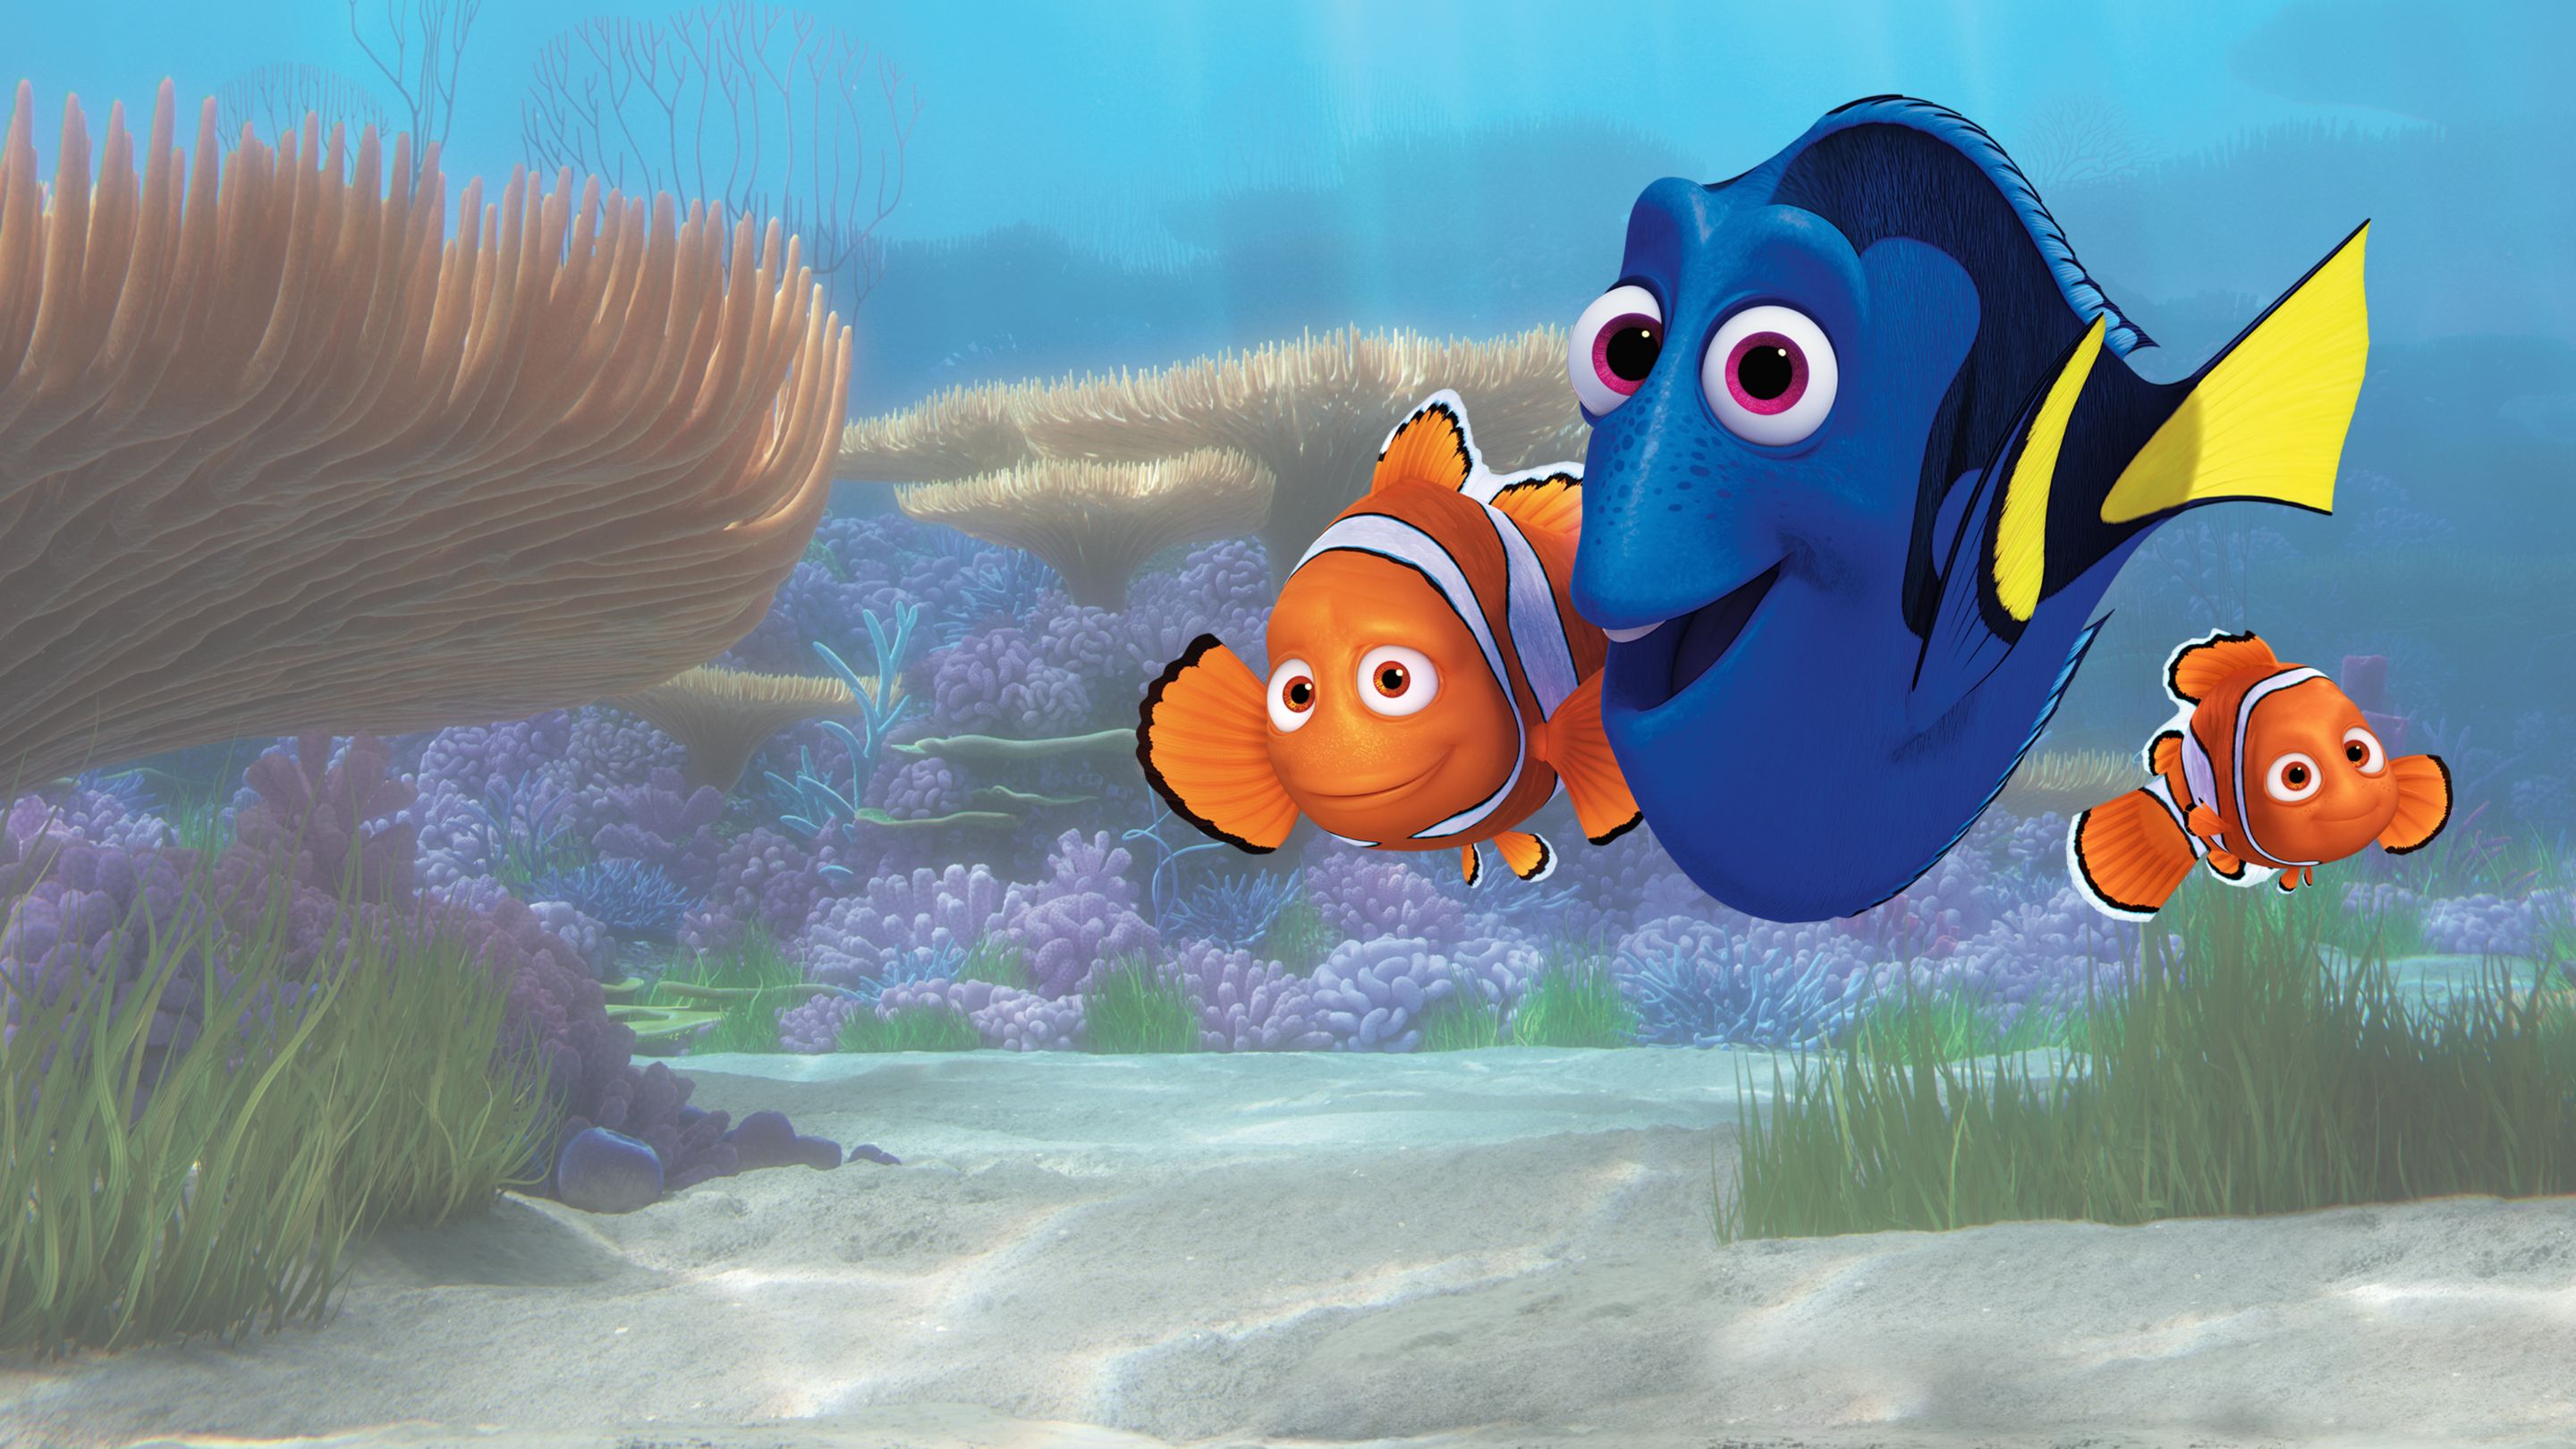 watch finding dory online fee